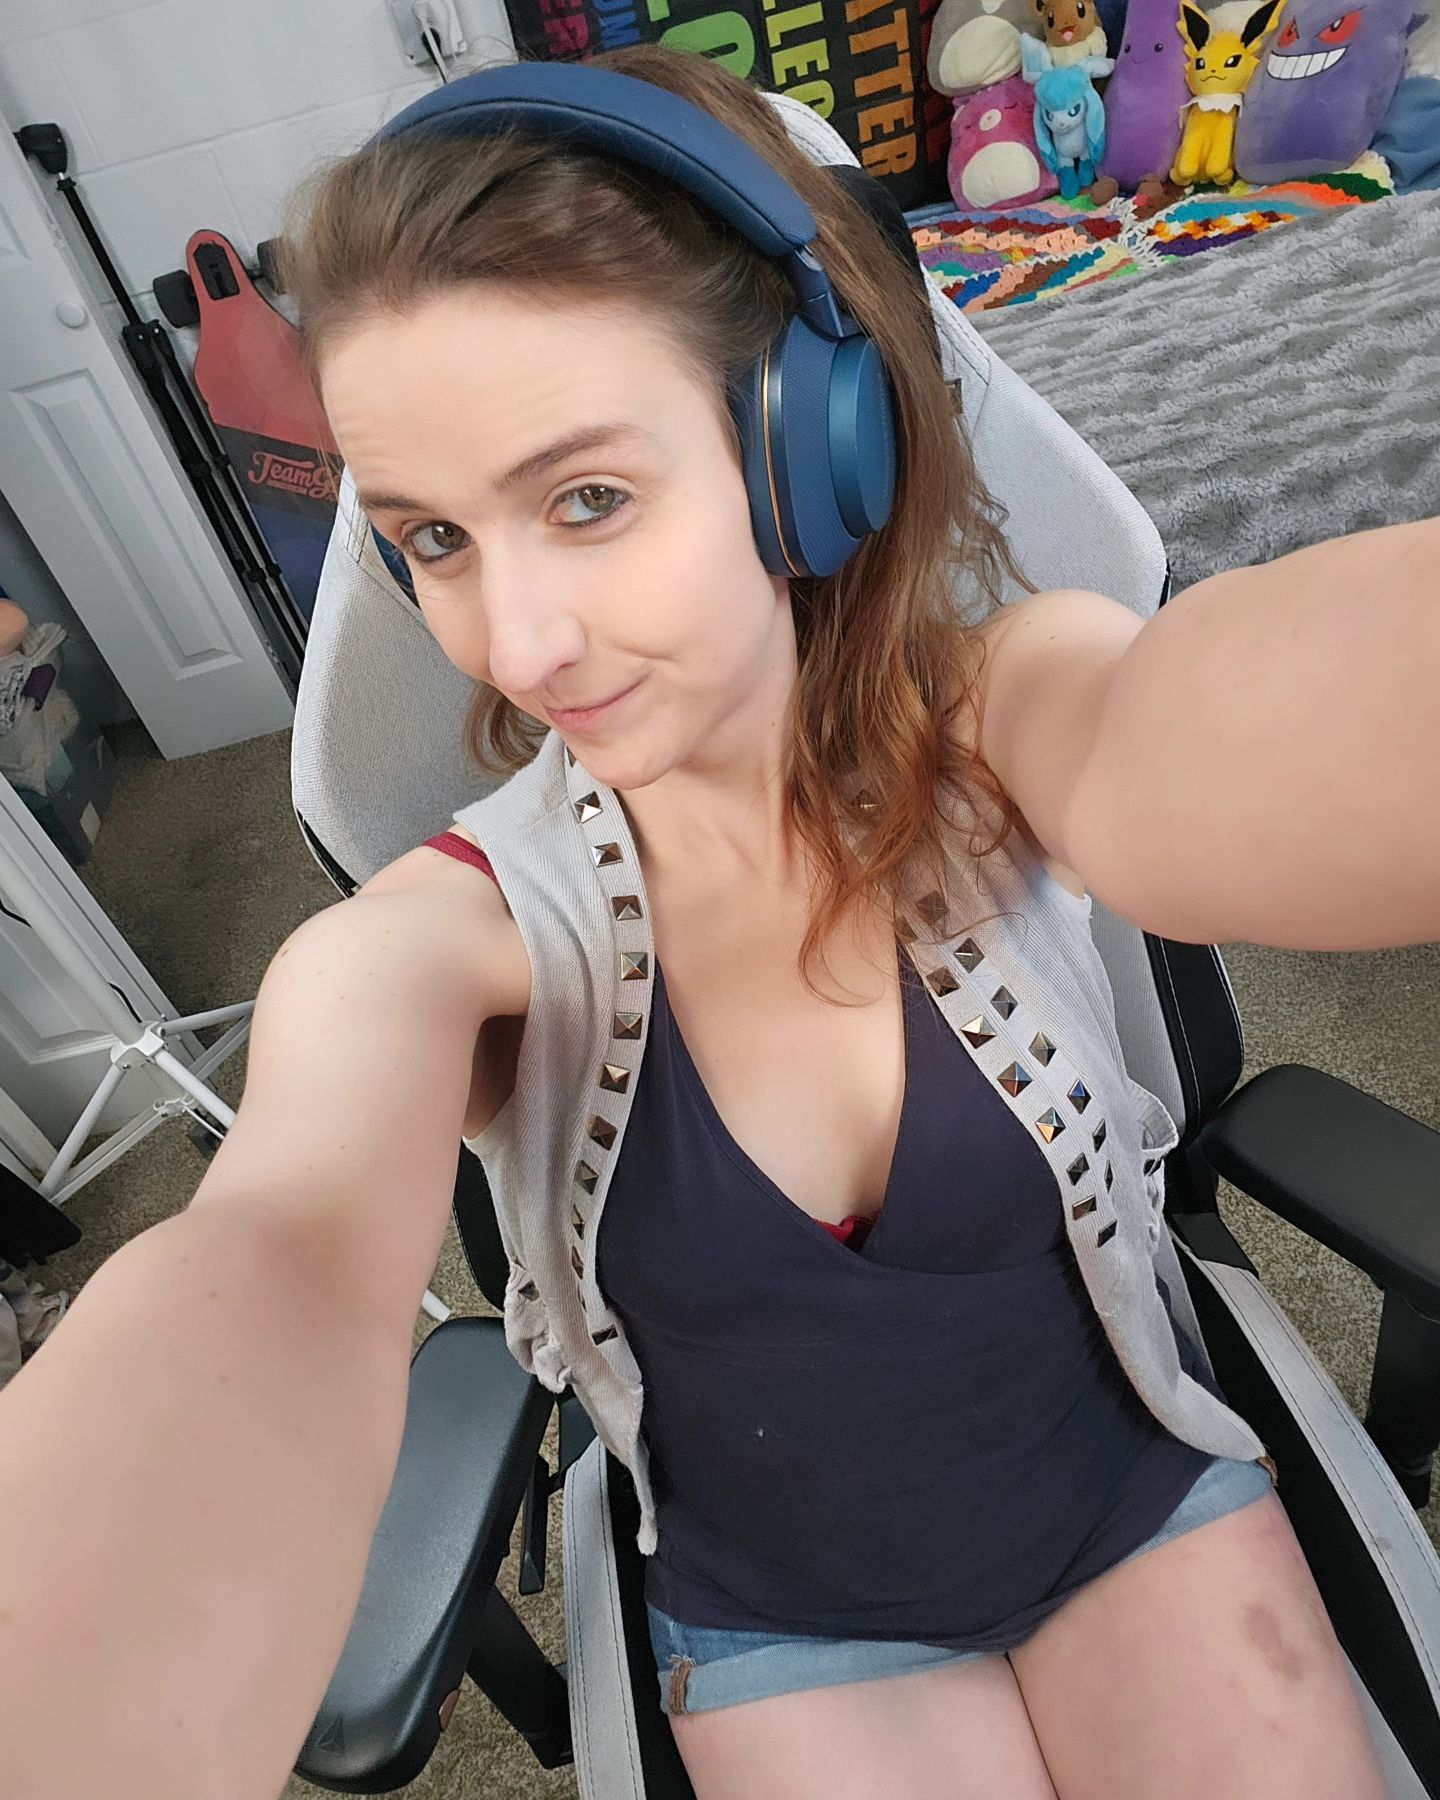 I'm about to go live on twitch! Playing Horizon: Zero Dawn in preparation for Horizon: Forbidden West
.
.
.
.
.
.
#hzd #pcgamer #tgirl #tgirlselfie #transpride #plushies #teamgee #longboard #twitchgirls